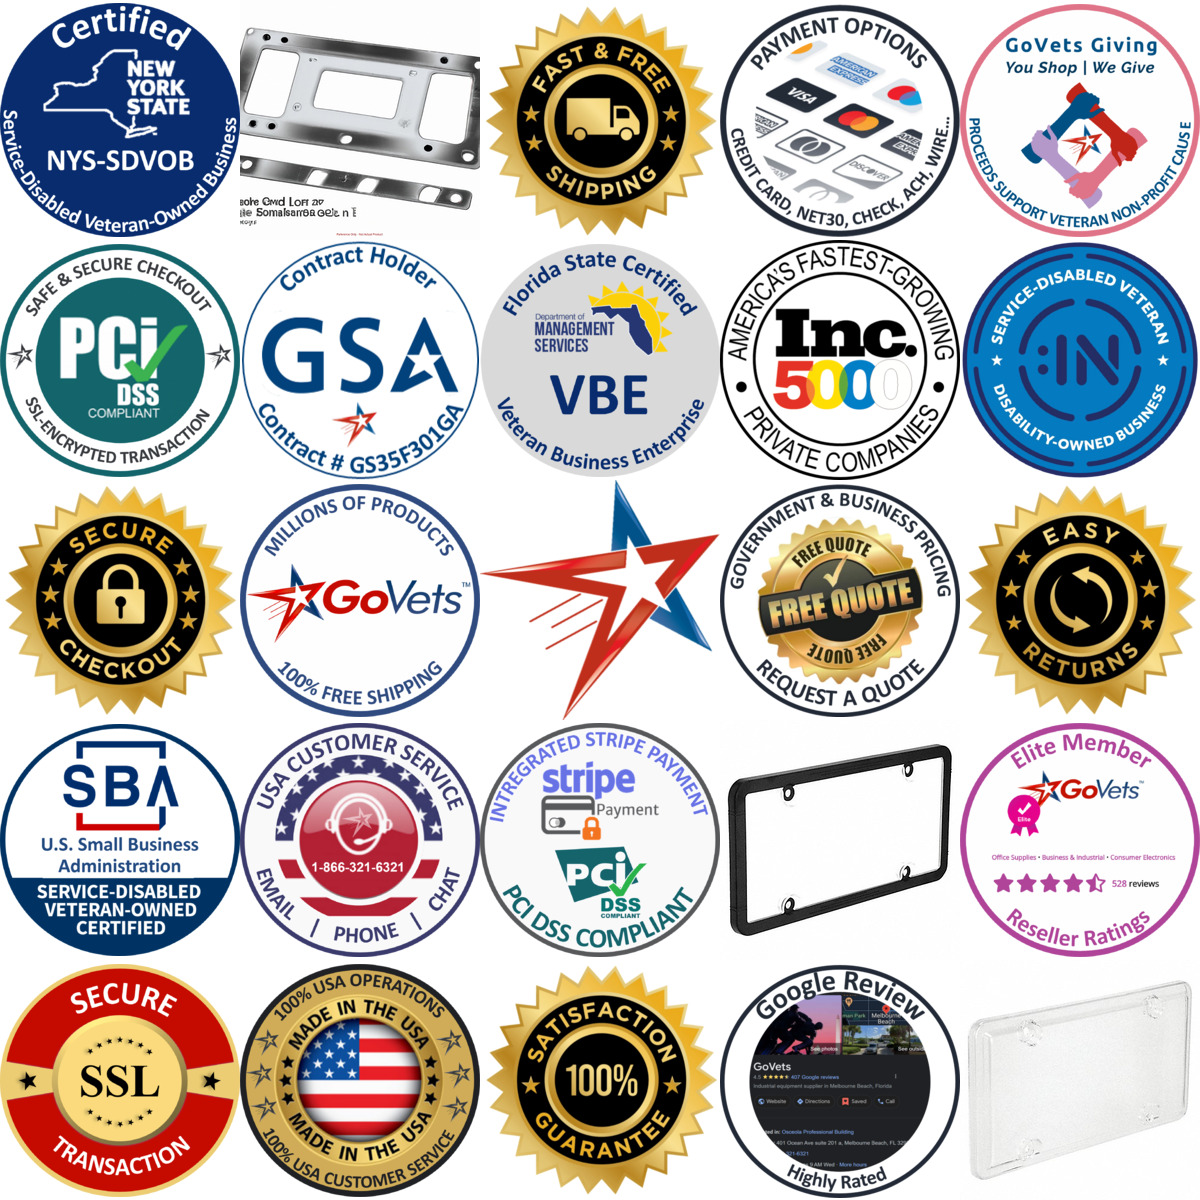 A selection of License Plate Frames and Covers products on GoVets